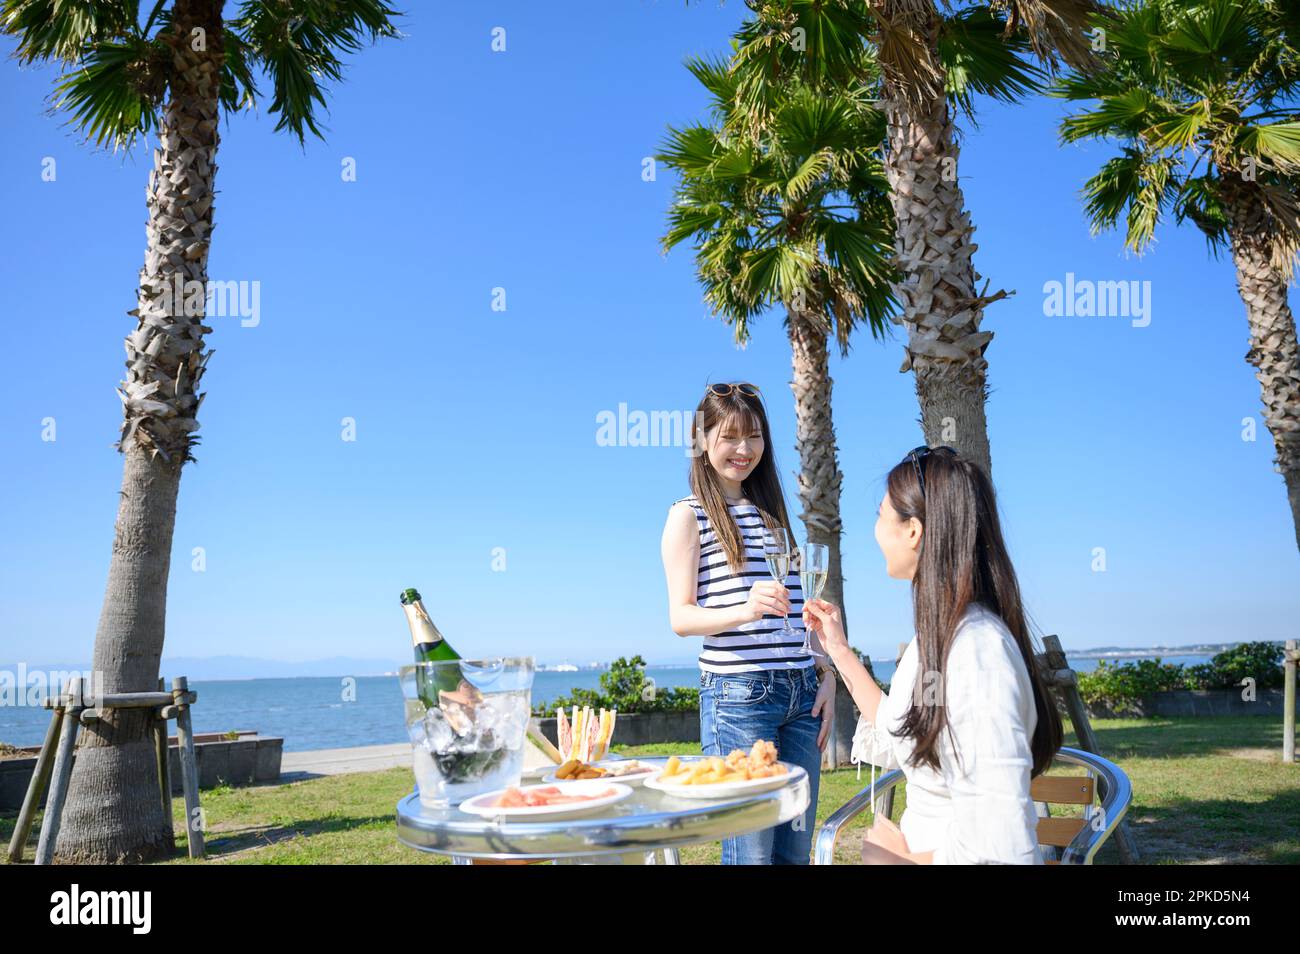 2 women dining in a sea resort Stock Photo